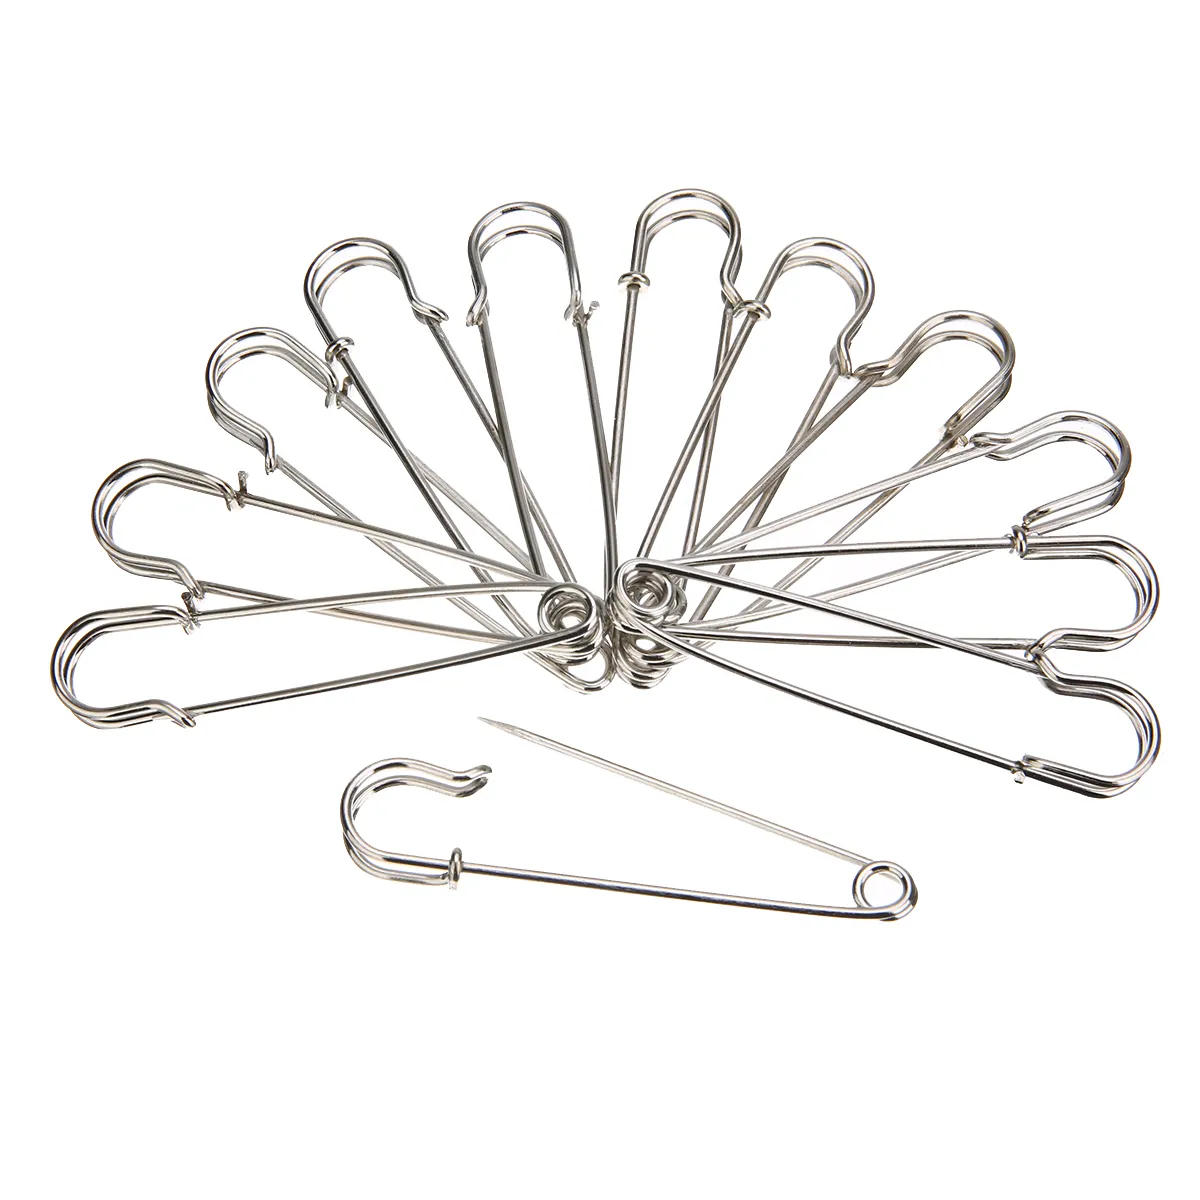 12pcs Large Heavy Duty Stainless Steel Big Jumbo Safety Pin Blanket Crafting for Making Wedding Bouquet Brooch DIY Decoration